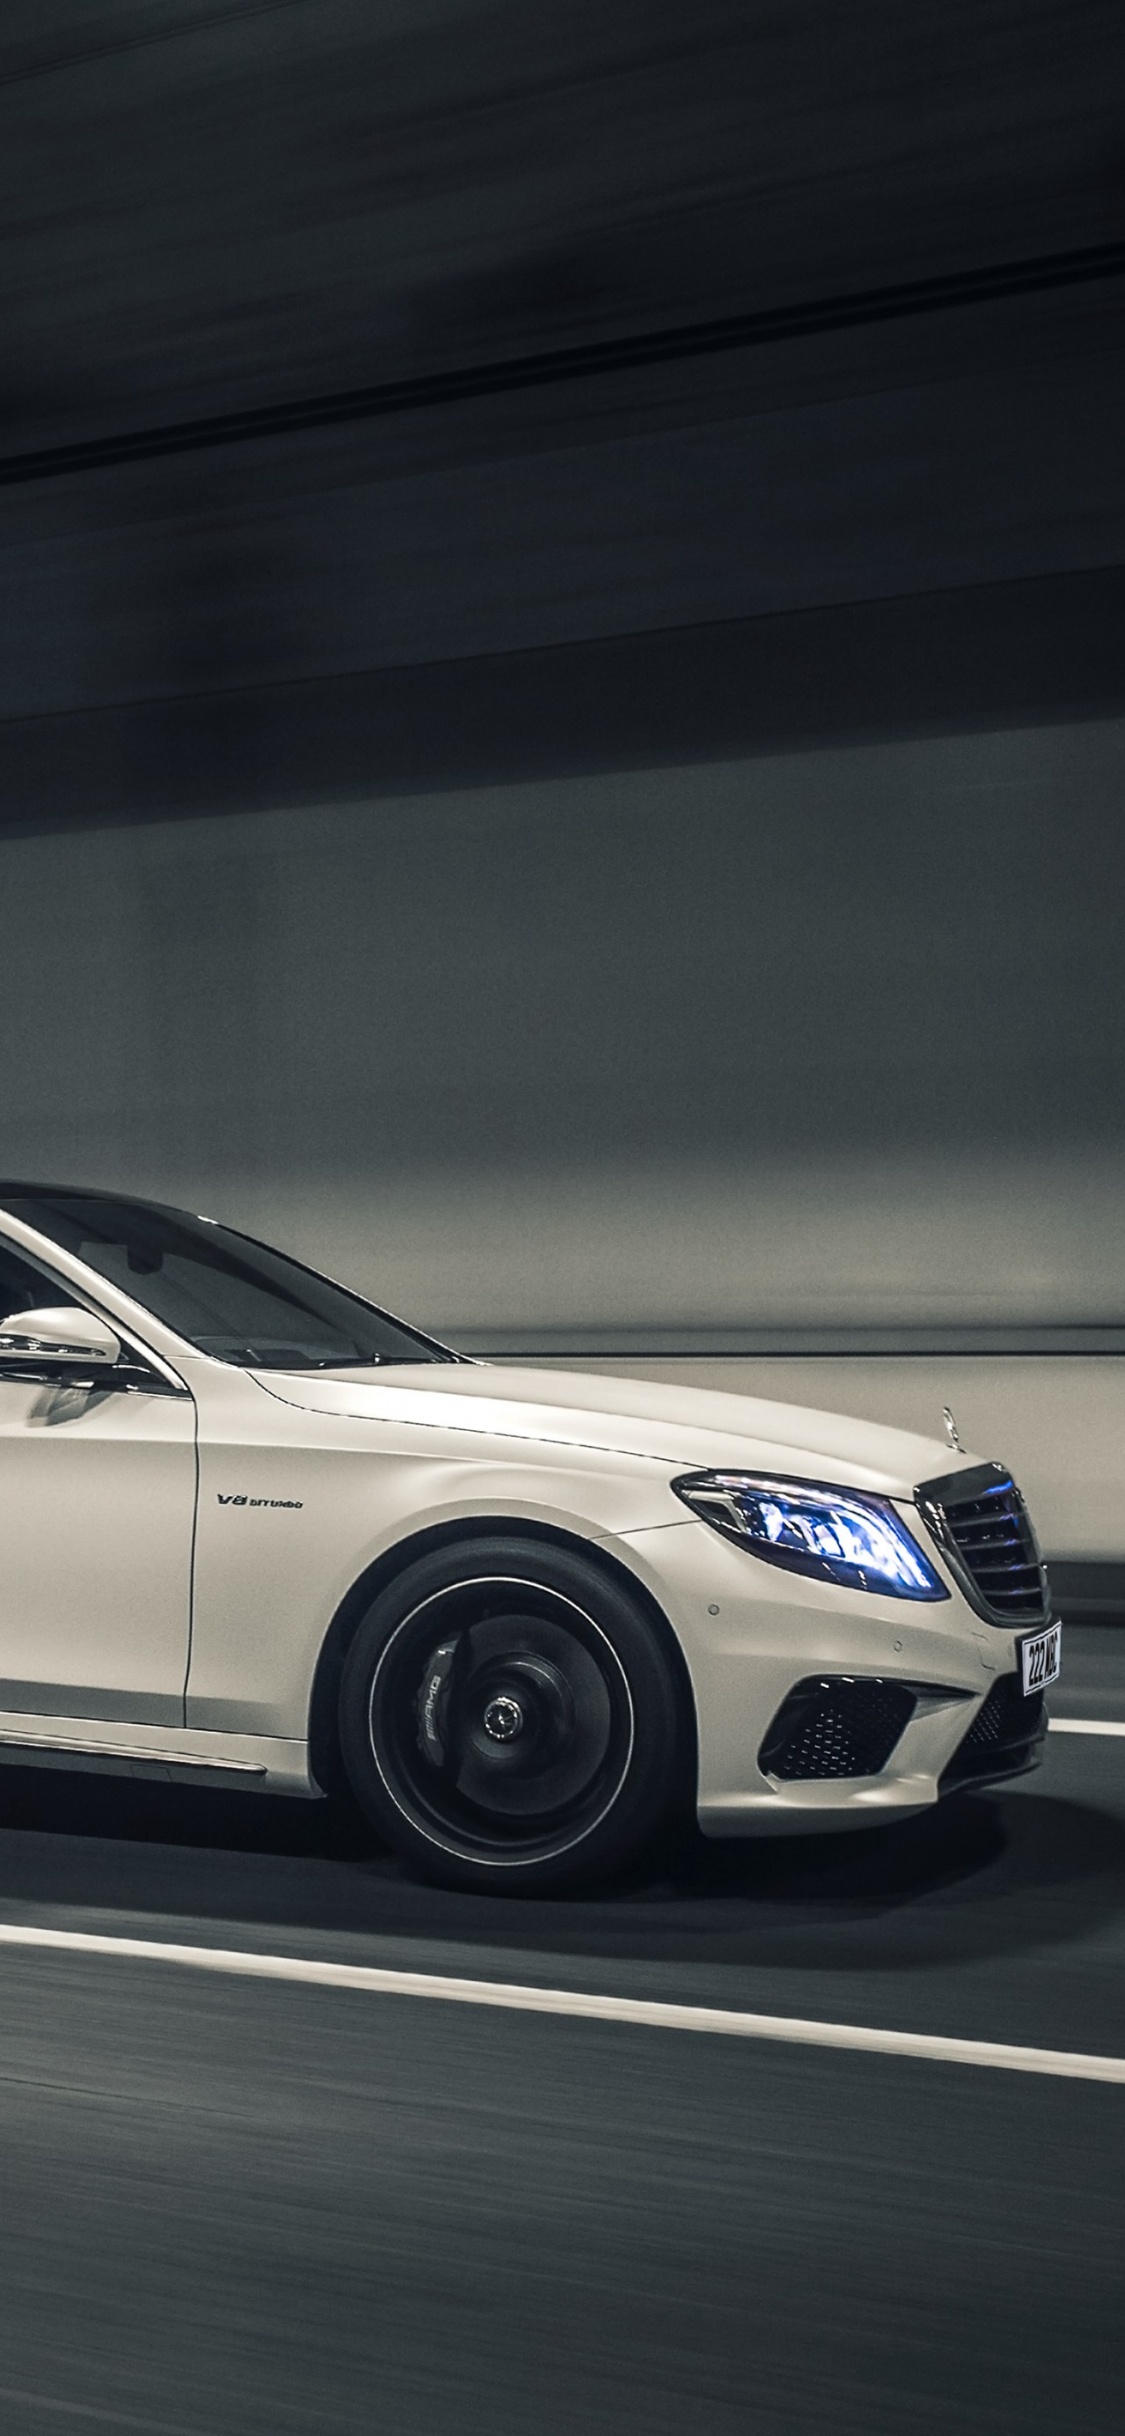 White Mercedes Benz Coupe on Road. Wallpaper in 1125x2436 Resolution